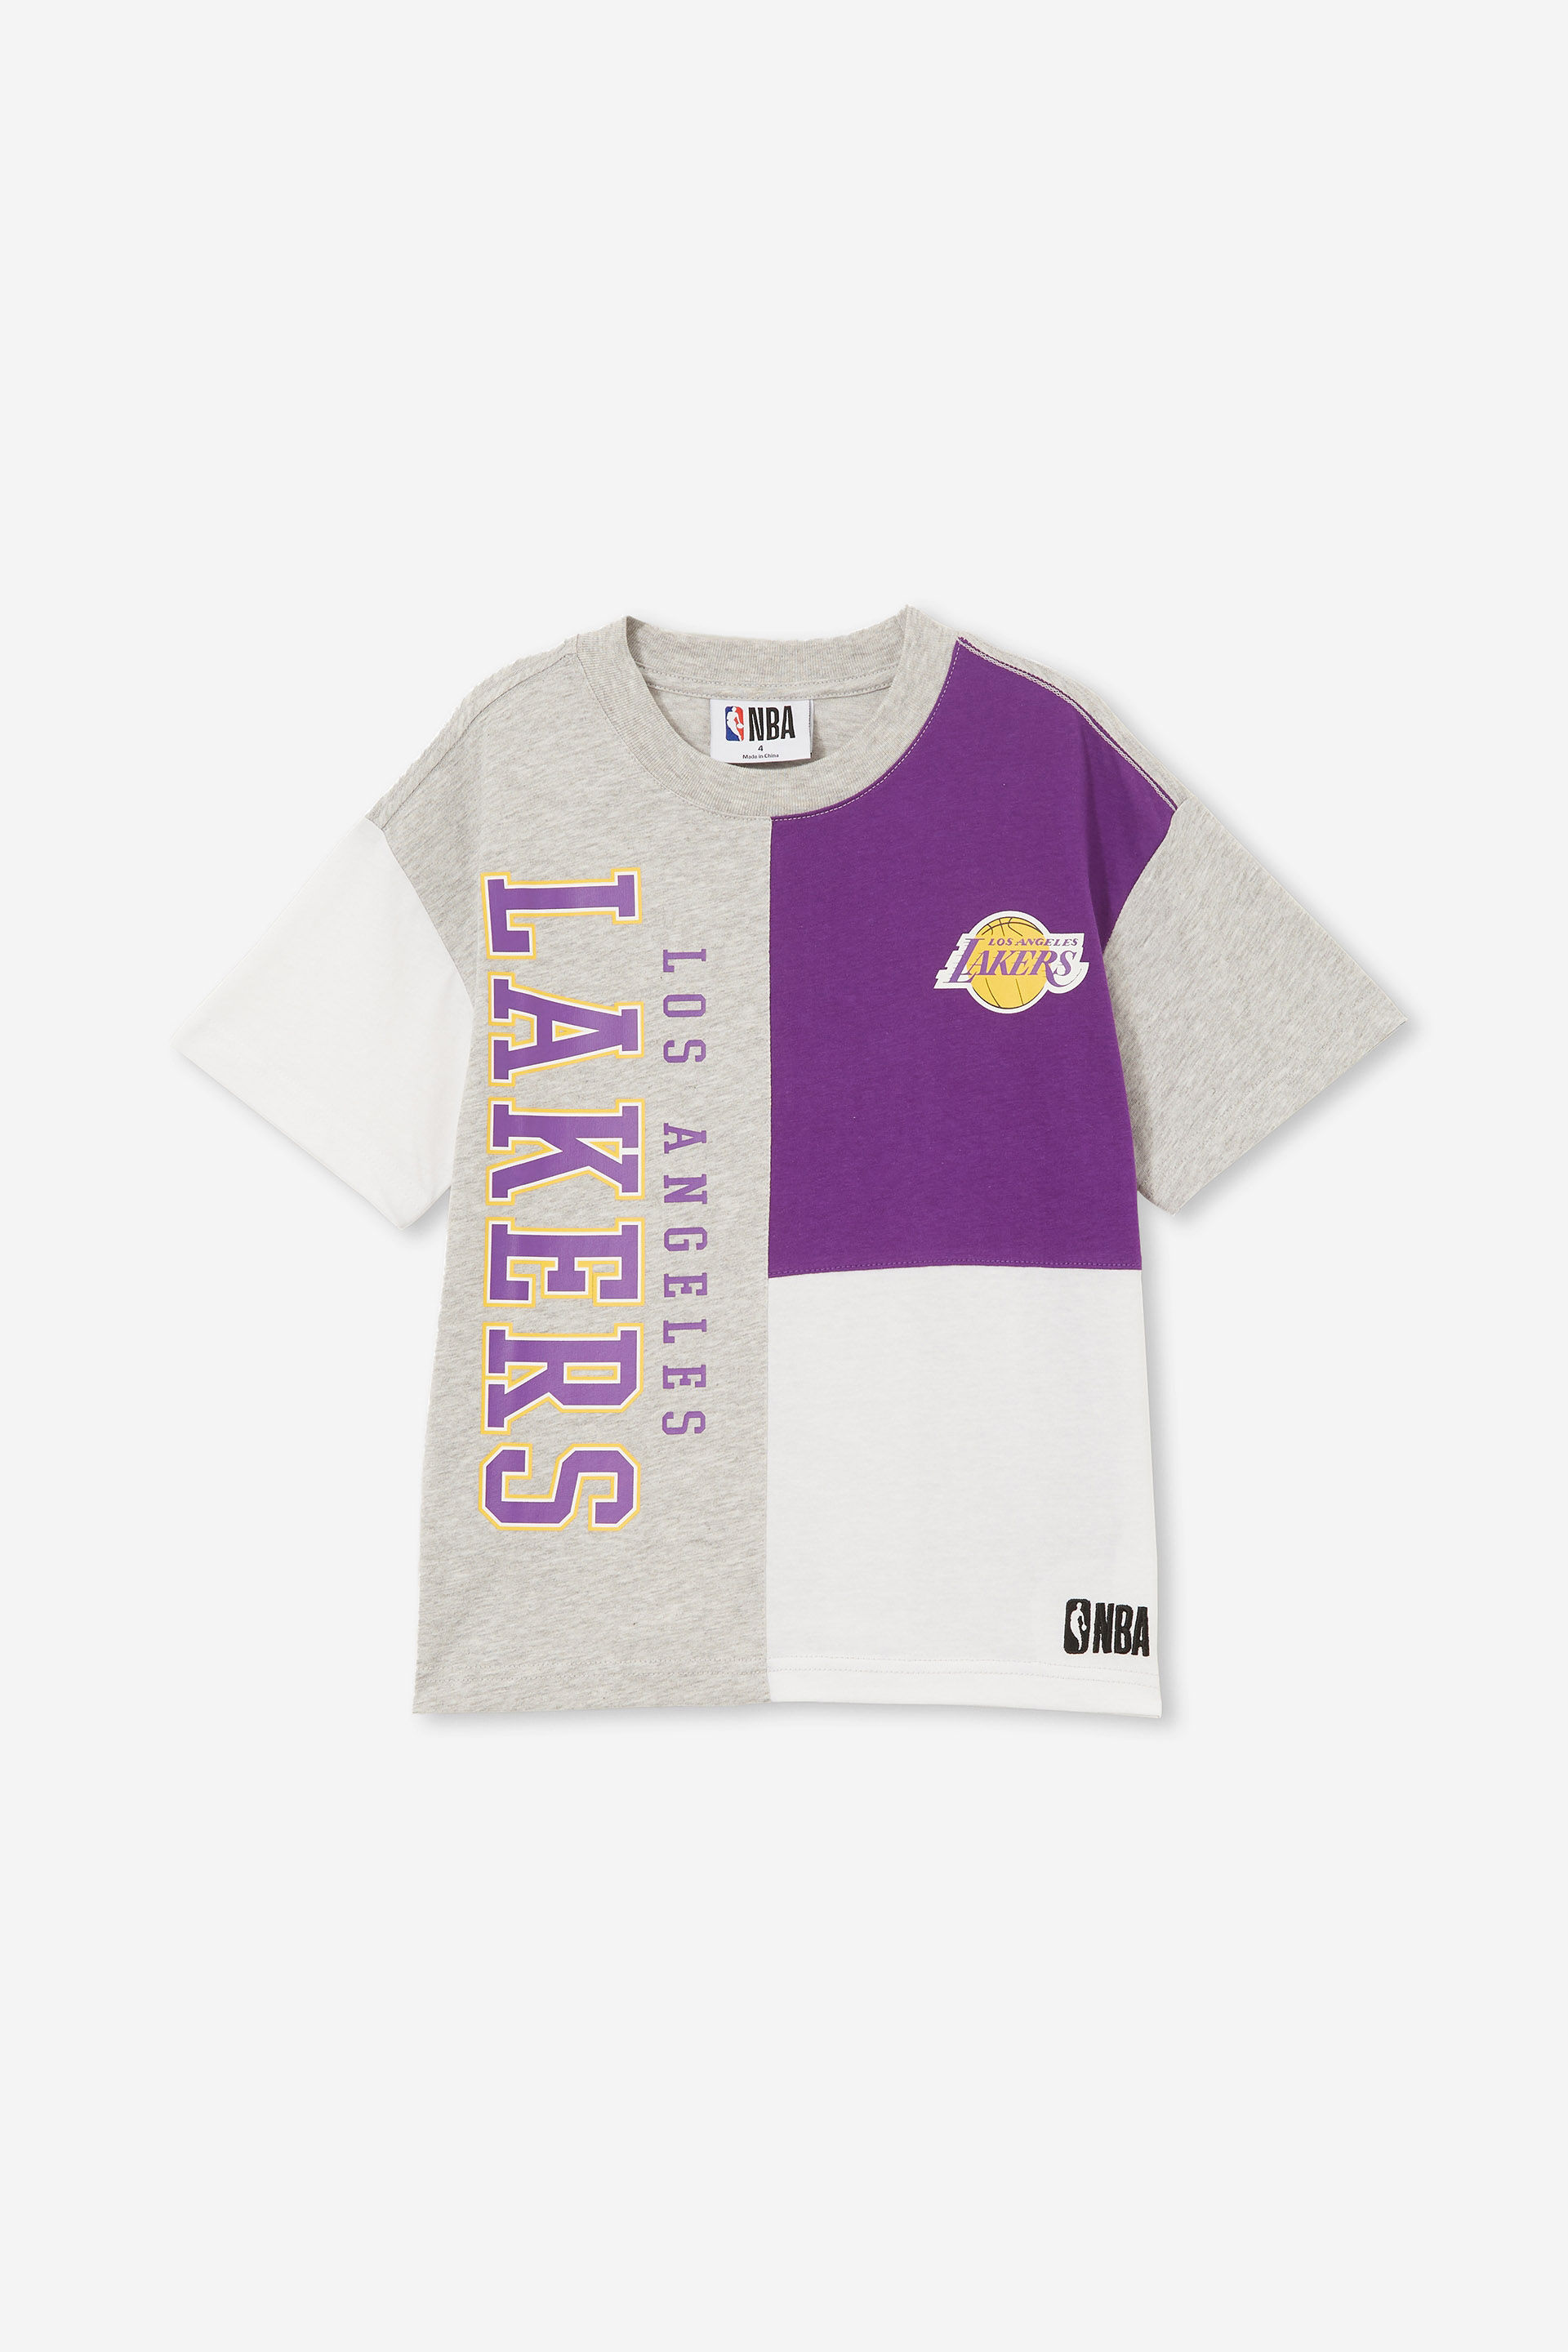 NBA Los Angeles Lakers Licensed Oversize Fit Back Printed Short Sleeve  T-Shirt